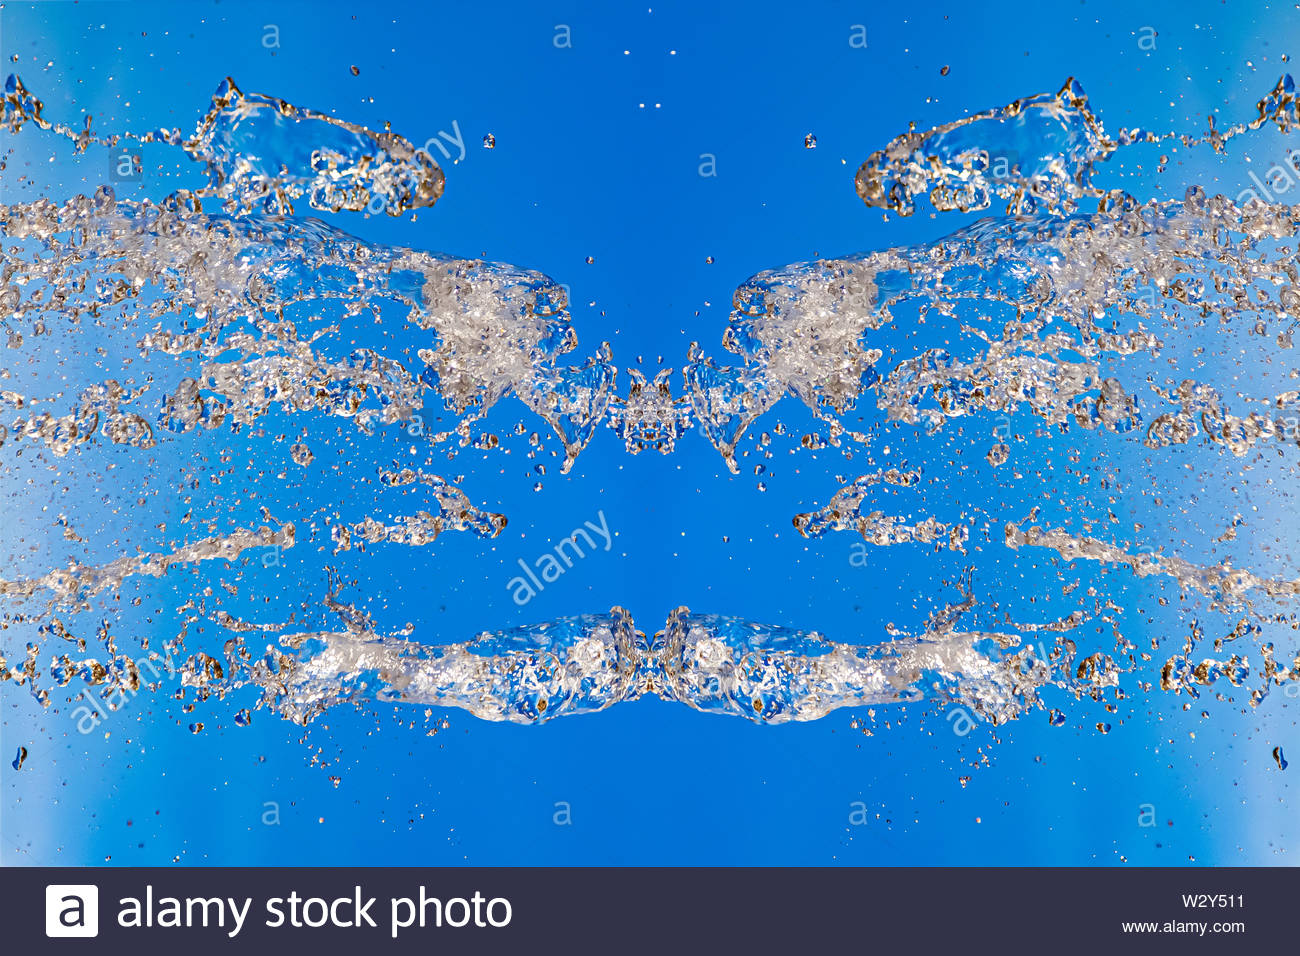 Symmetrical Pattern Of Stopped Water Droplets With Transparent